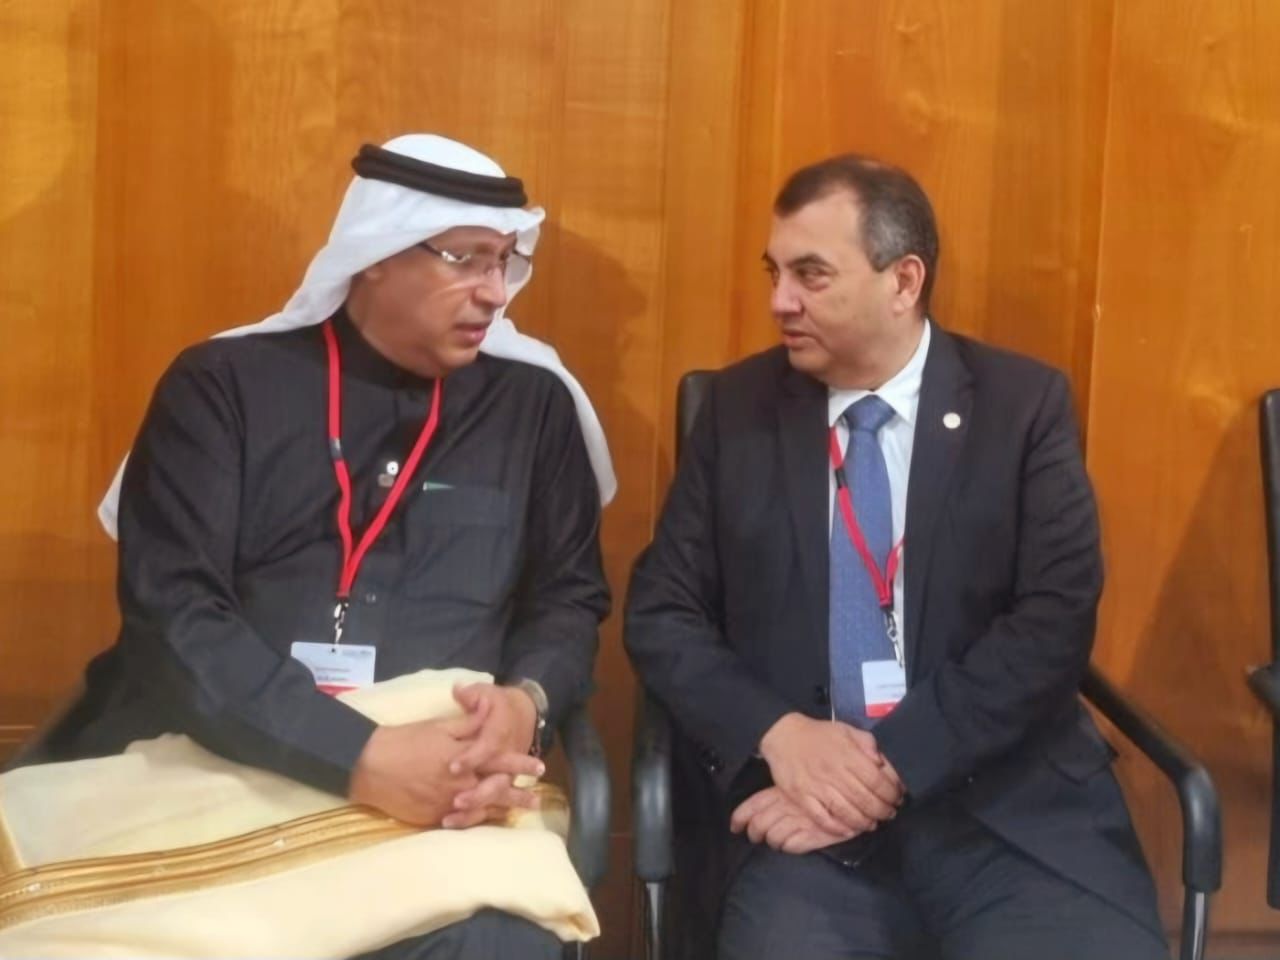 Environment Minister holds bilateral meeting with Saudi climate negotiator in Berlin.